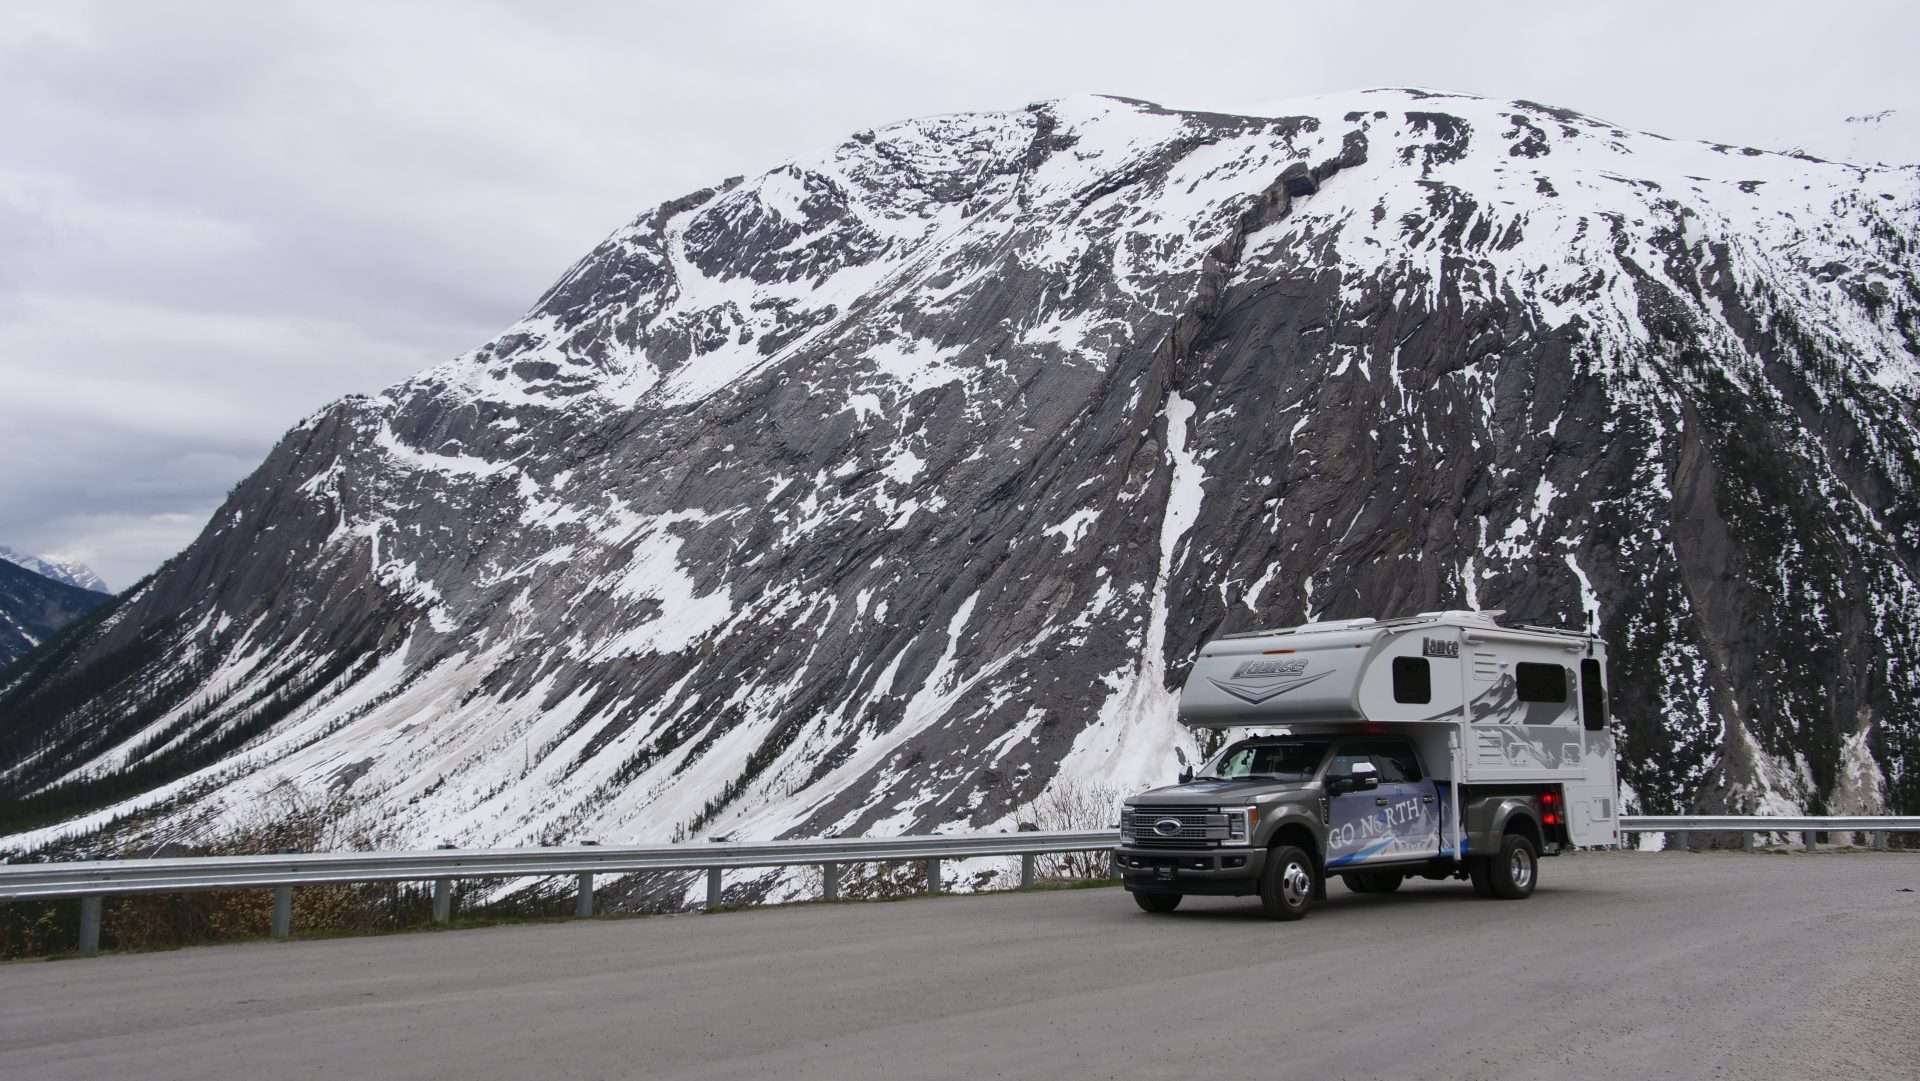 Mortons on the Move truck camper driving through Alaskan mountains.